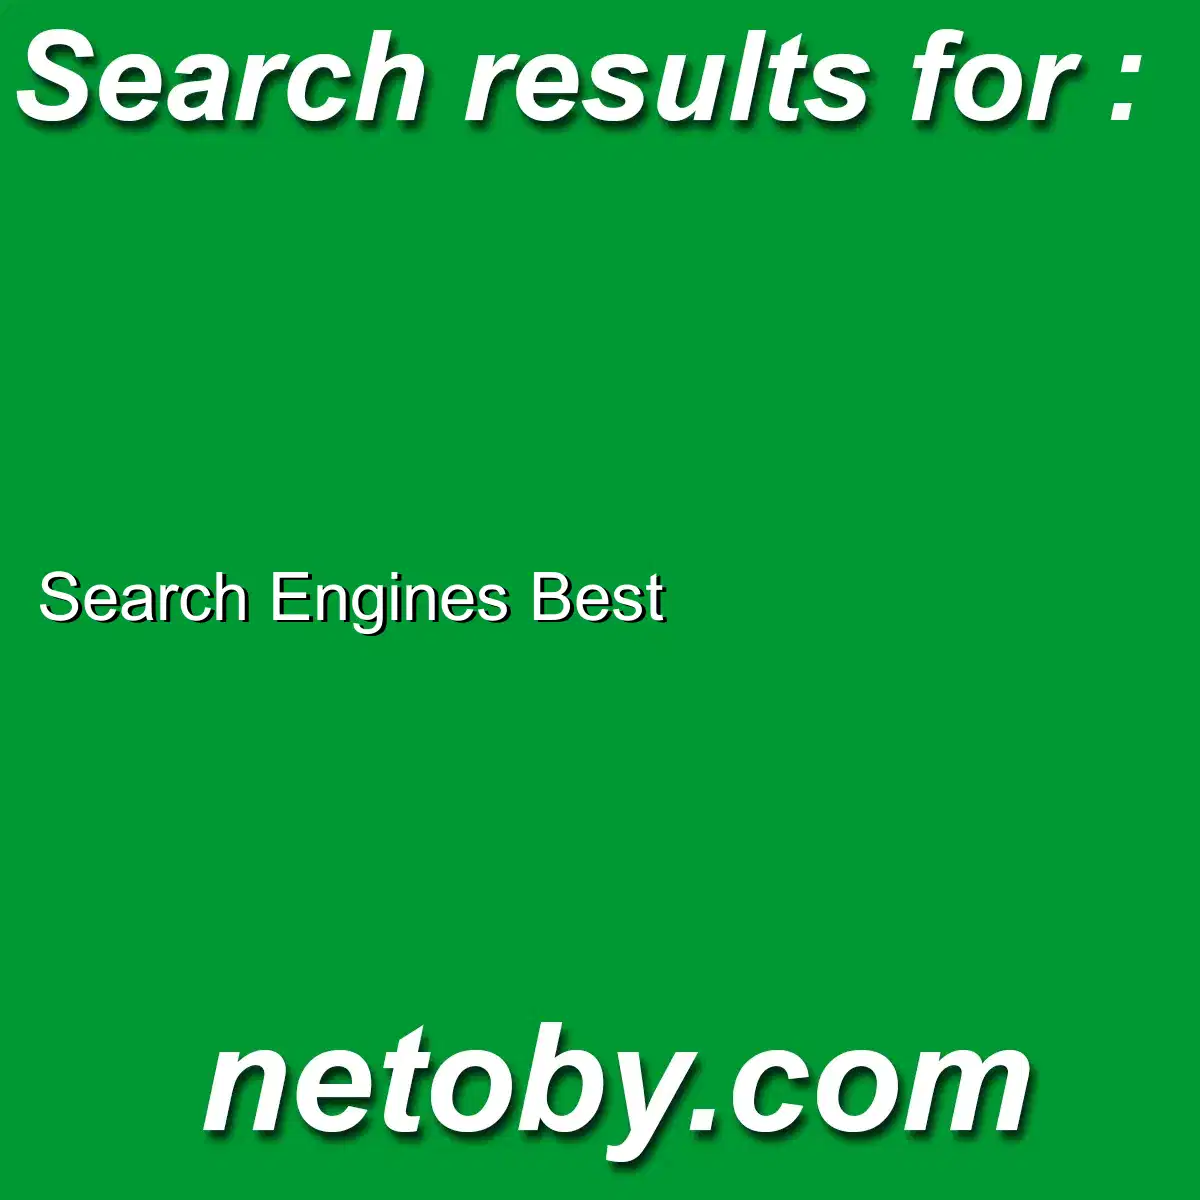 ﻿Search Engines Best